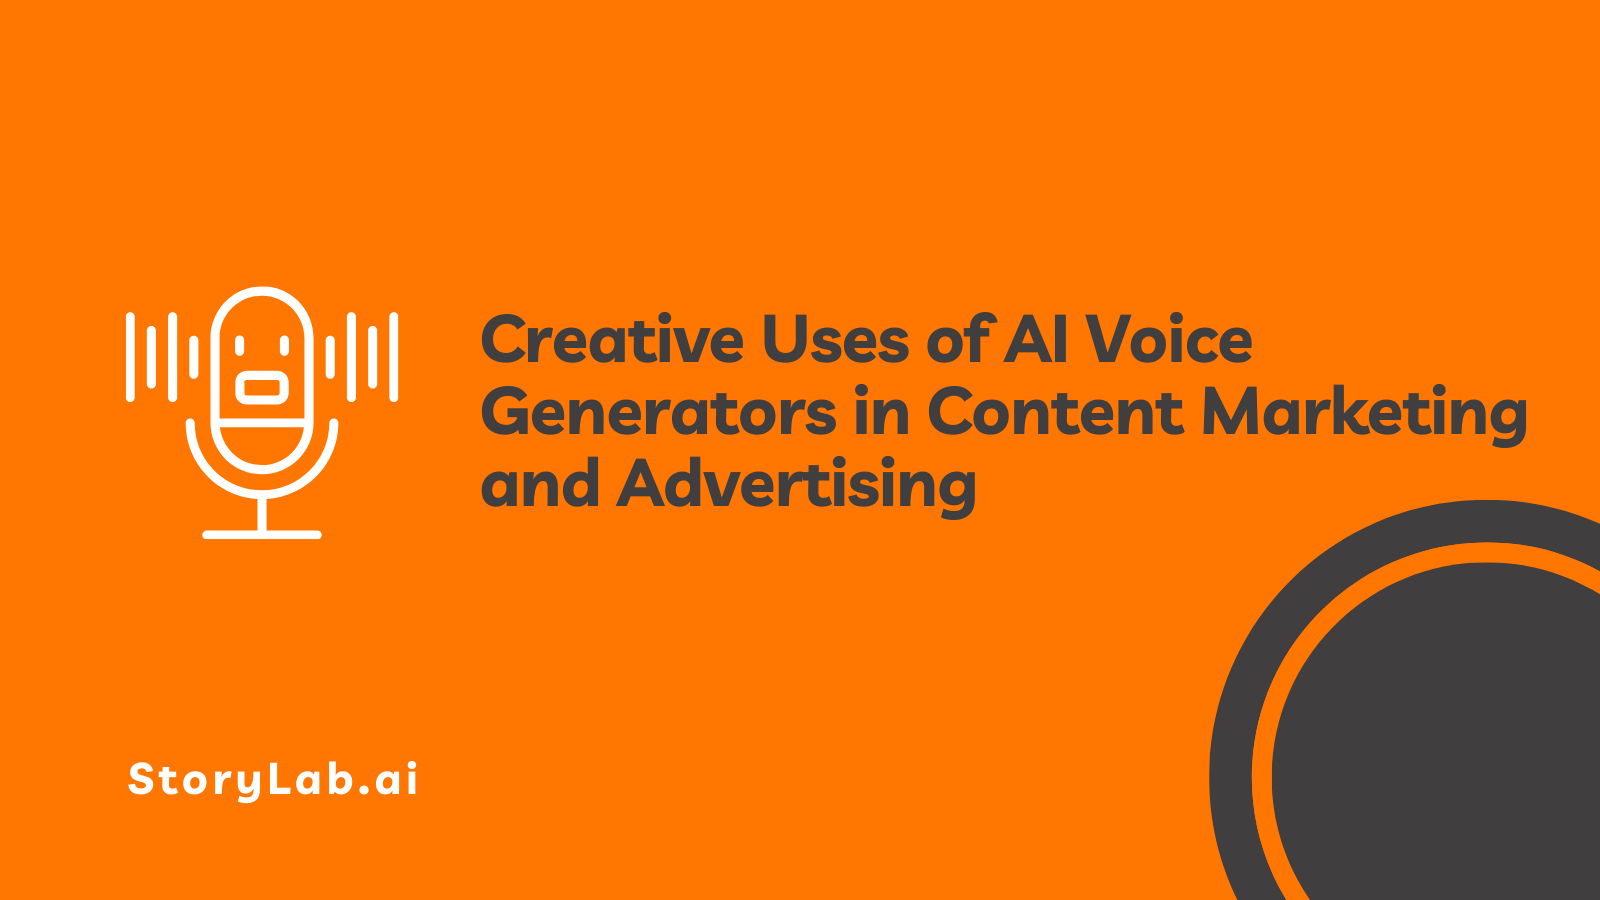 Creative Uses of AI Voice Generators in Content Marketing and Advertising